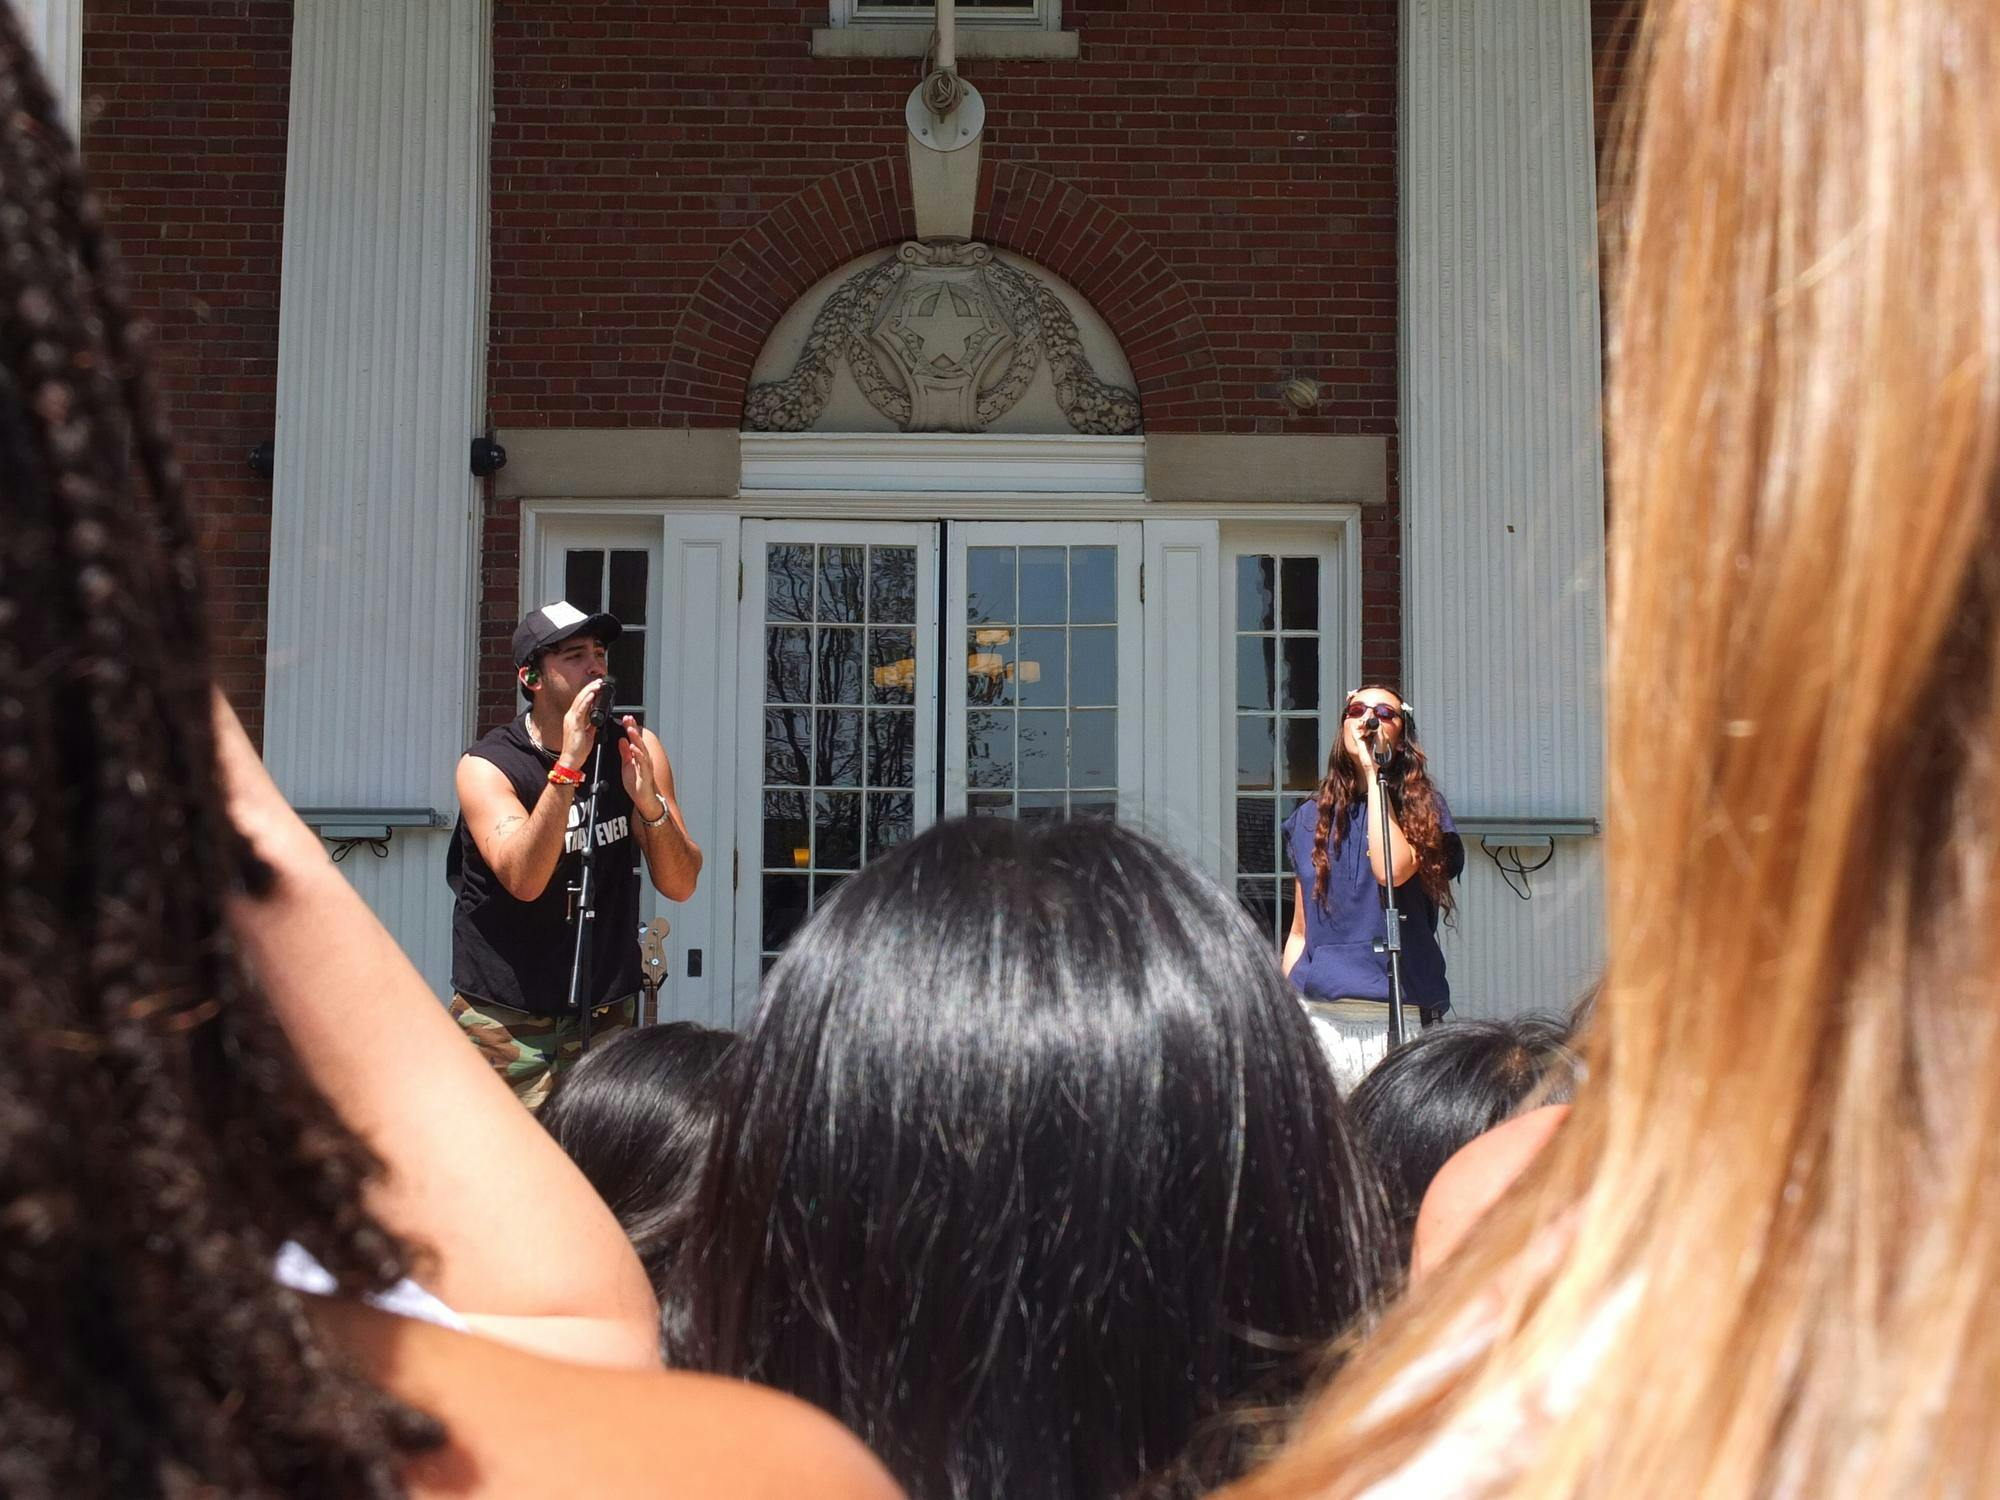 Two performers sing into microphones outside of a brick building with Ionic columns. 